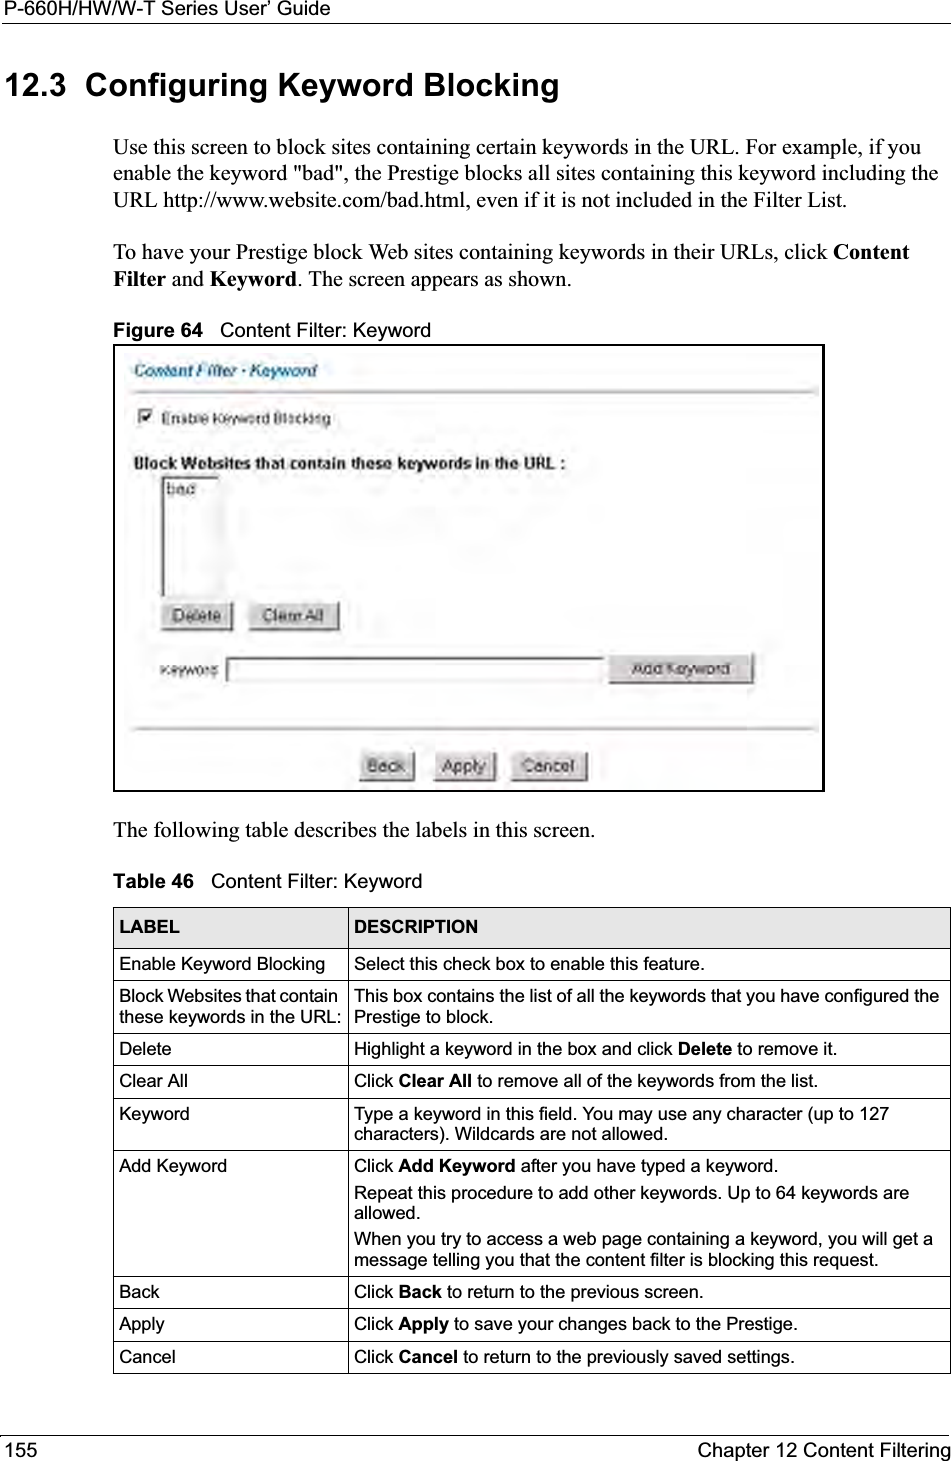 P-660H/HW/W-T Series User’ Guide155 Chapter 12 Content Filtering12.3  Configuring Keyword BlockingUse this screen to block sites containing certain keywords in the URL. For example, if you enable the keyword &quot;bad&quot;, the Prestige blocks all sites containing this keyword including the URL http://www.website.com/bad.html, even if it is not included in the Filter List. To have your Prestige block Web sites containing keywords in their URLs, click Content Filter and Keyword. The screen appears as shown.Figure 64   Content Filter: KeywordThe following table describes the labels in this screen.  Table 46   Content Filter: KeywordLABEL DESCRIPTIONEnable Keyword Blocking Select this check box to enable this feature.Block Websites that contain these keywords in the URL:This box contains the list of all the keywords that you have configured the Prestige to block. Delete  Highlight a keyword in the box and click Delete to remove it. Clear All  Click Clear All to remove all of the keywords from the list.Keyword Type a keyword in this field. You may use any character (up to 127 characters). Wildcards are not allowed.Add Keyword Click Add Keyword after you have typed a keyword. Repeat this procedure to add other keywords. Up to 64 keywords are allowed.When you try to access a web page containing a keyword, you will get a message telling you that the content filter is blocking this request.Back Click Back to return to the previous screen.Apply Click Apply to save your changes back to the Prestige.Cancel Click Cancel to return to the previously saved settings.